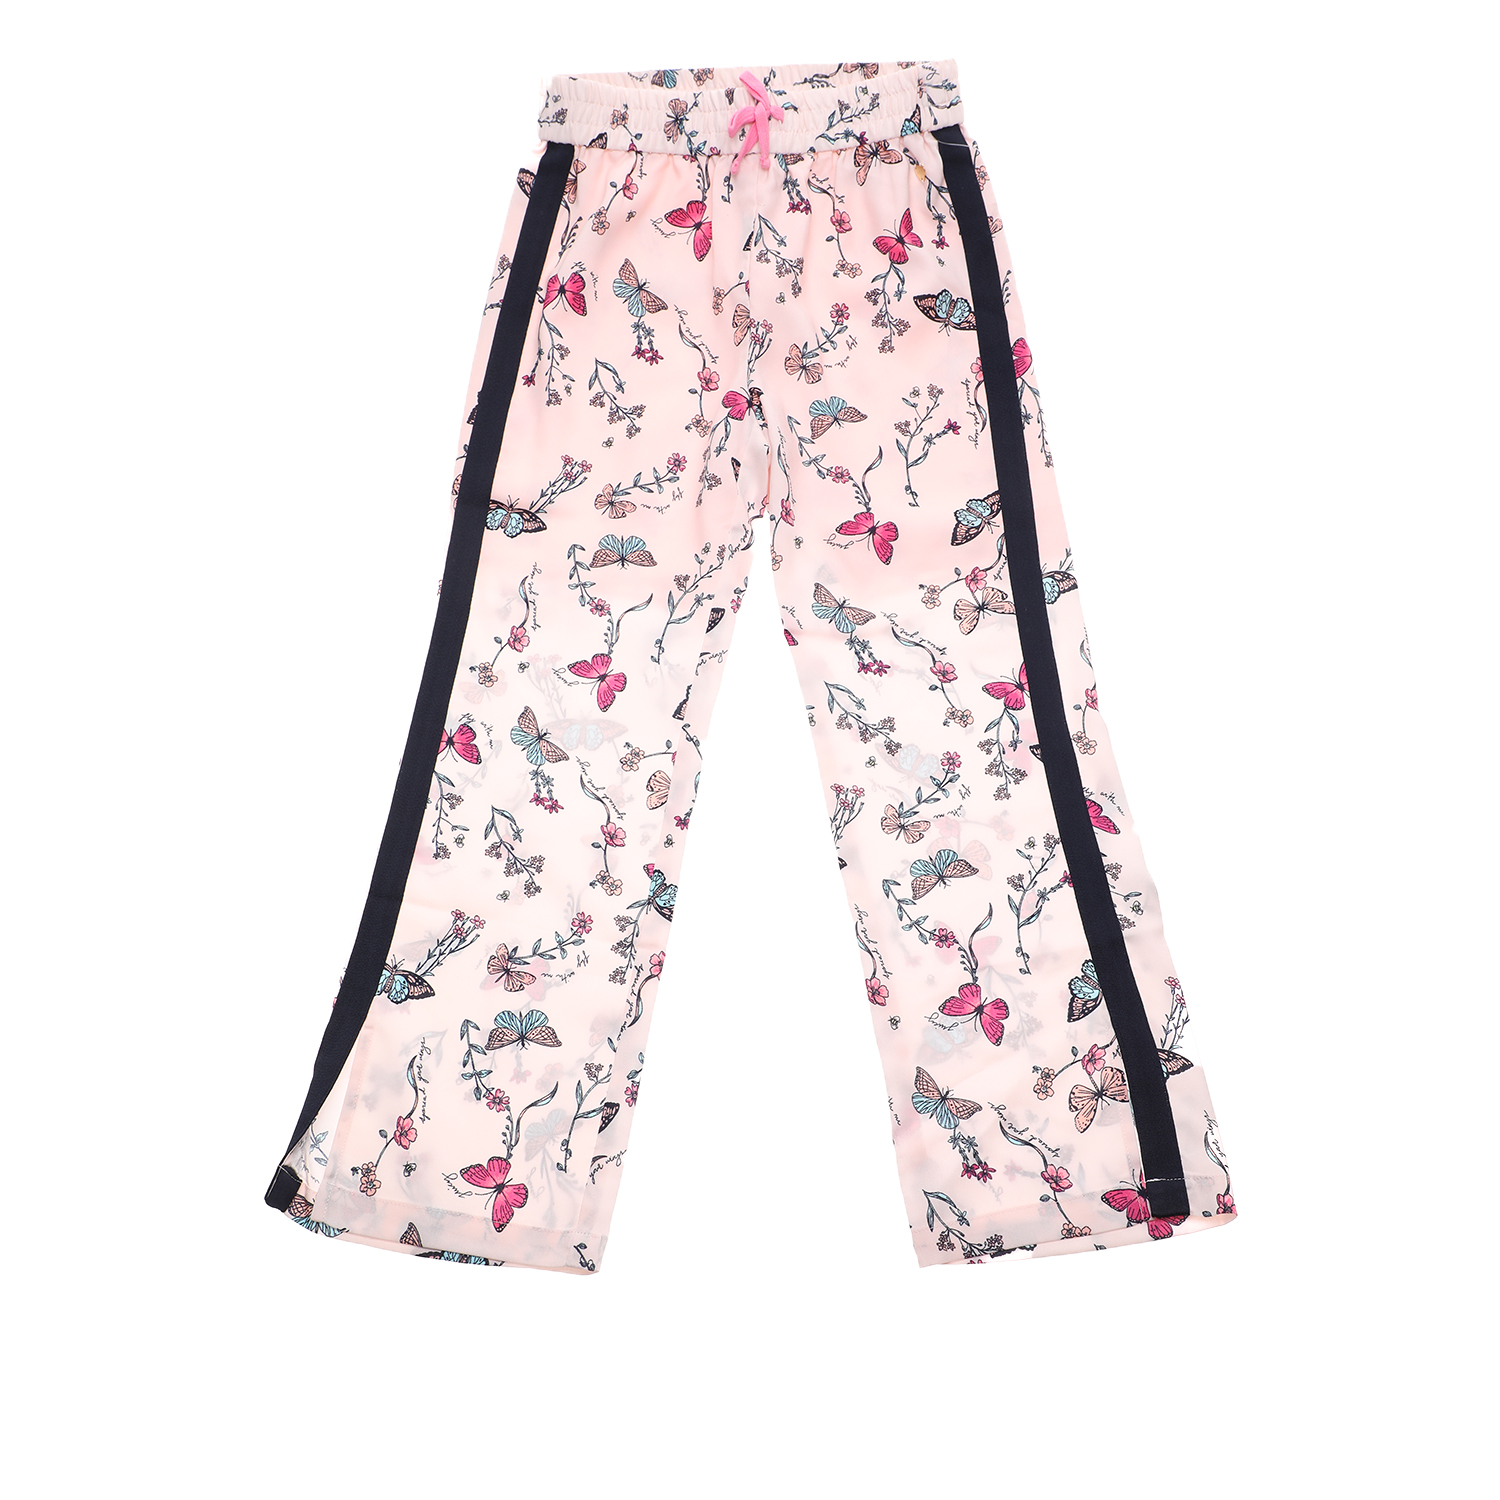 JUICY COUTURE KIDS - Παιδικό παντελόνι JUICY COUTURE KIDS BUTTERFLY GARDEN SATIN ροζ Παιδικά/Girls/Ρούχα/Παντελόνια